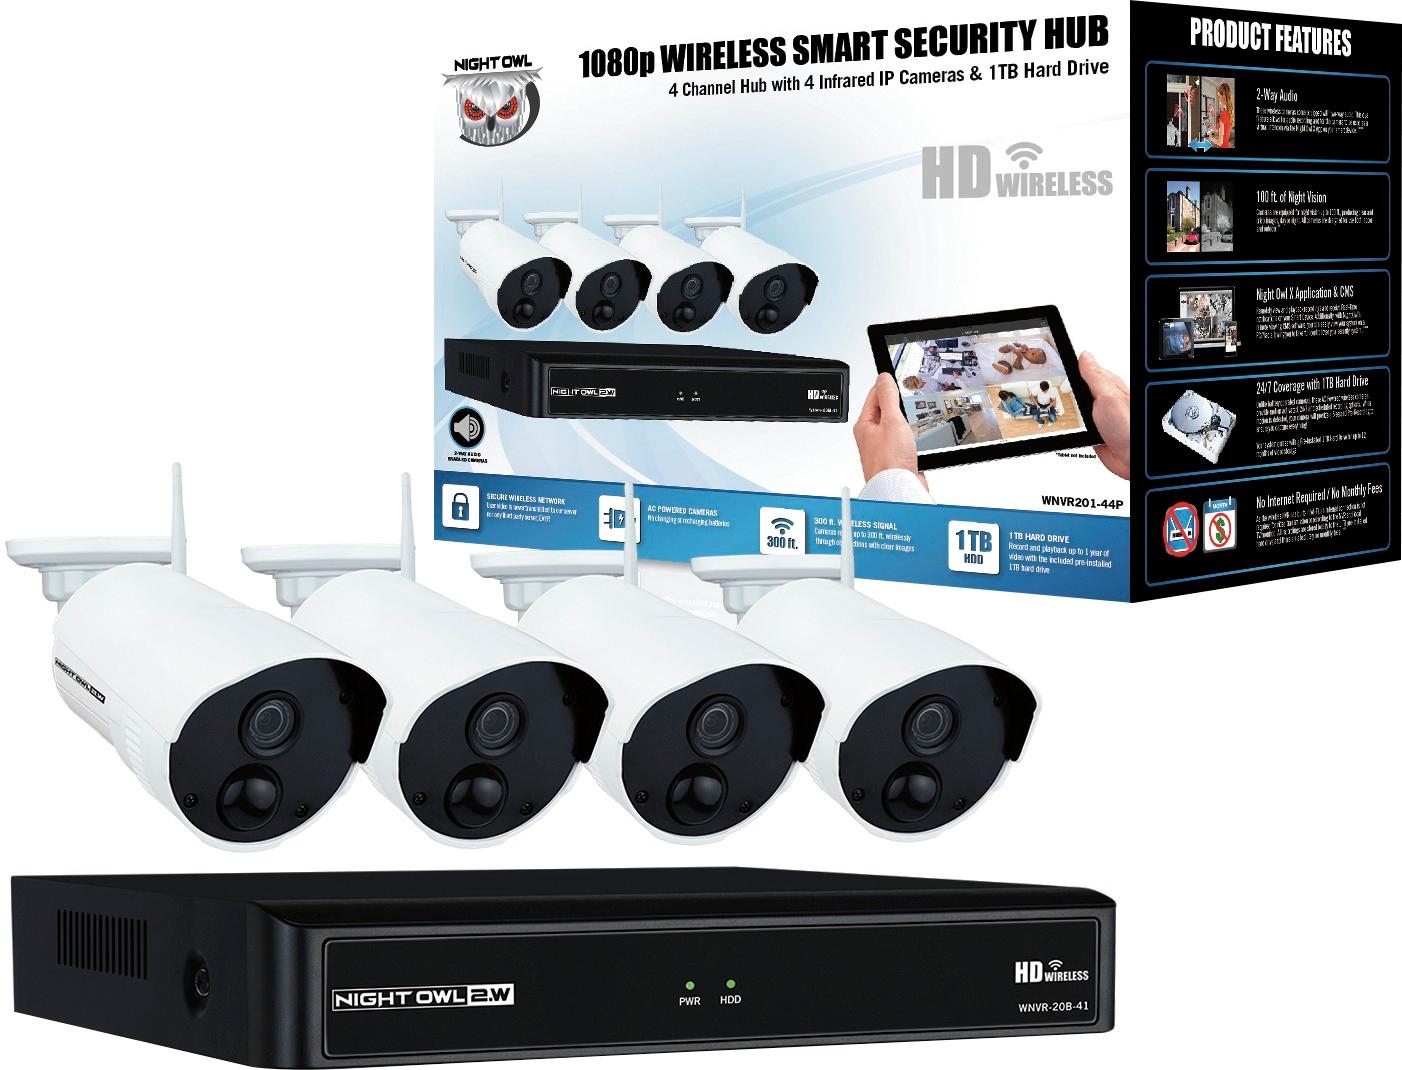 night owl wireless security system reviews